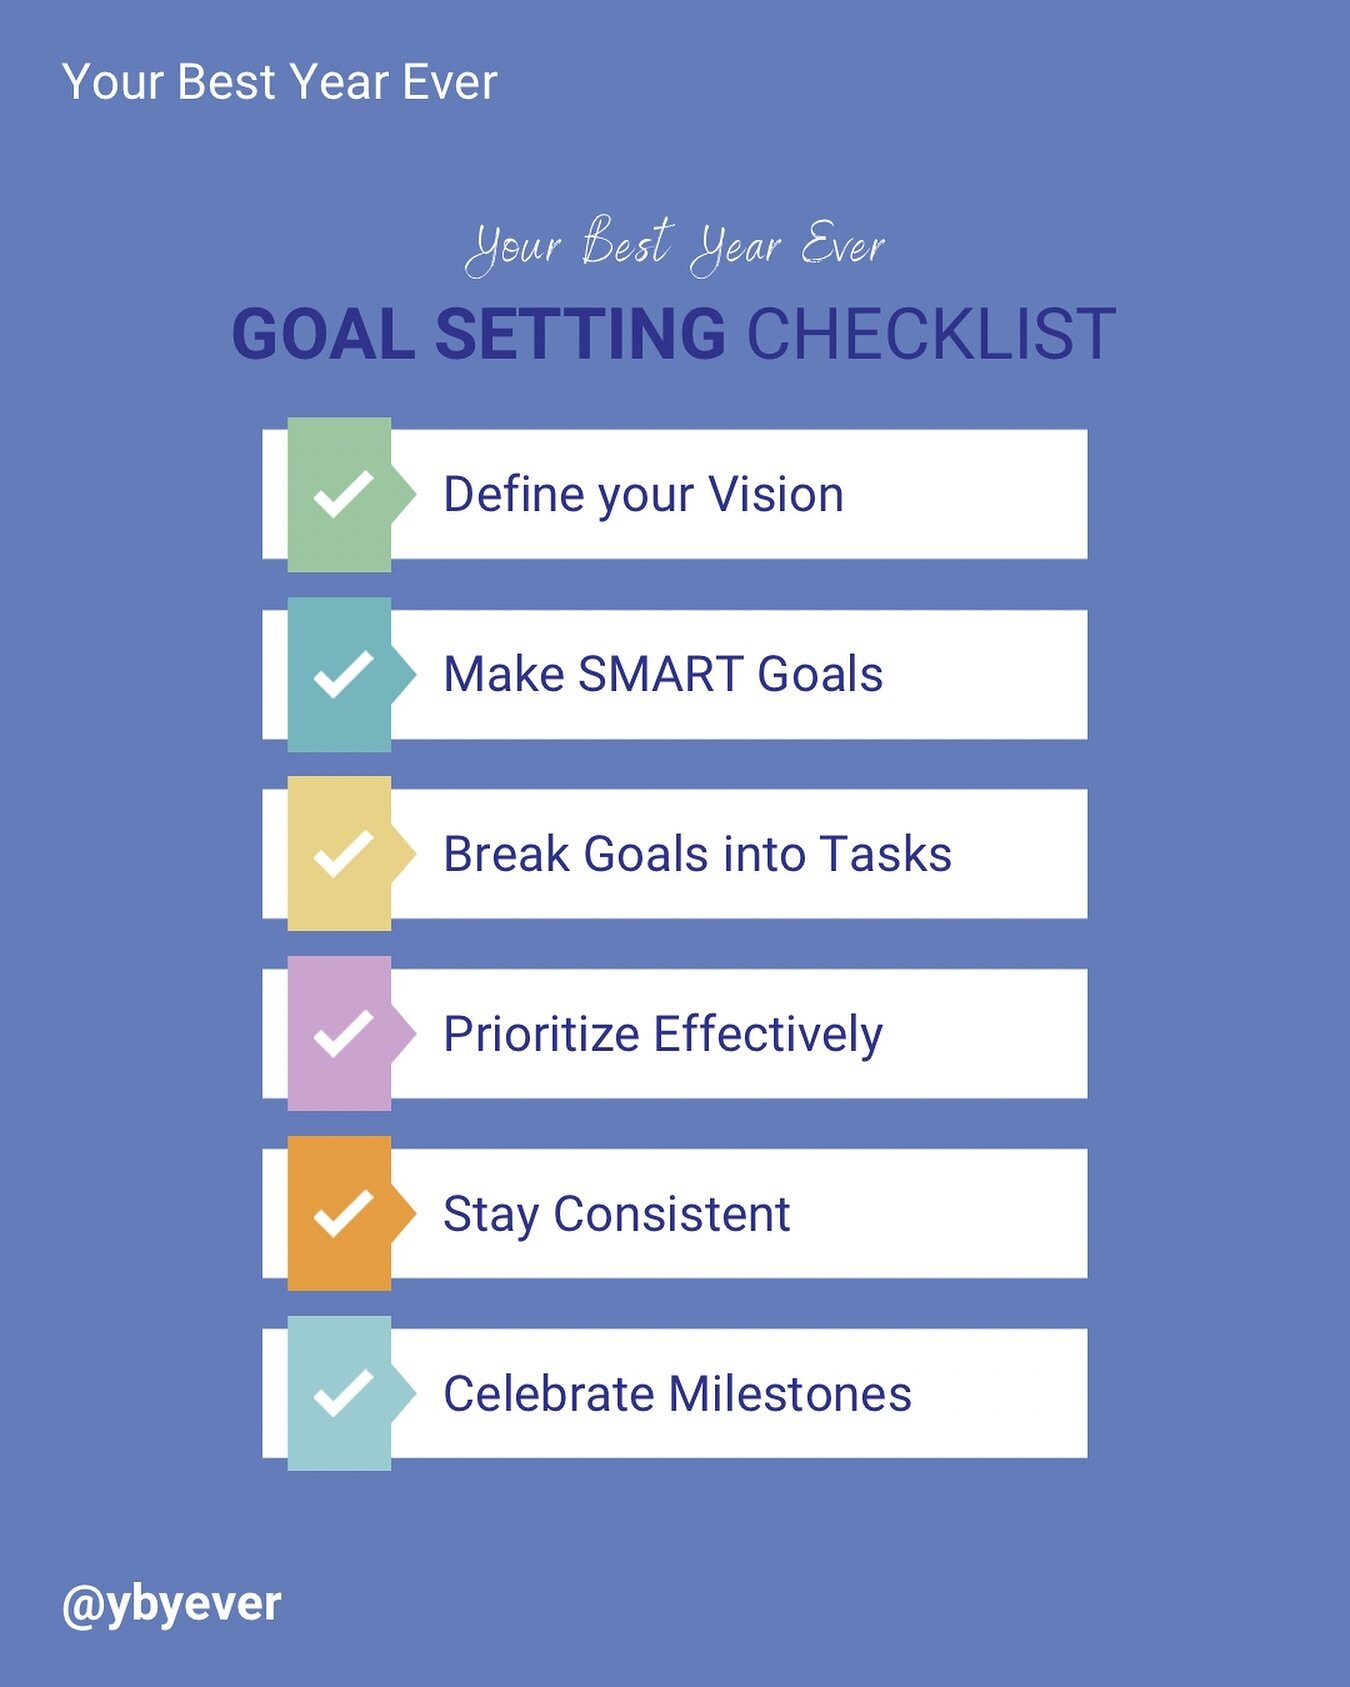 Ready to crush your 2024 goals?

Use this checklist to ensure your goal-setting journey is on track.

Which step resonates with you the most? Share your thoughts below and let&rsquo;s support each other in reaching new heights this year!

Link in bio